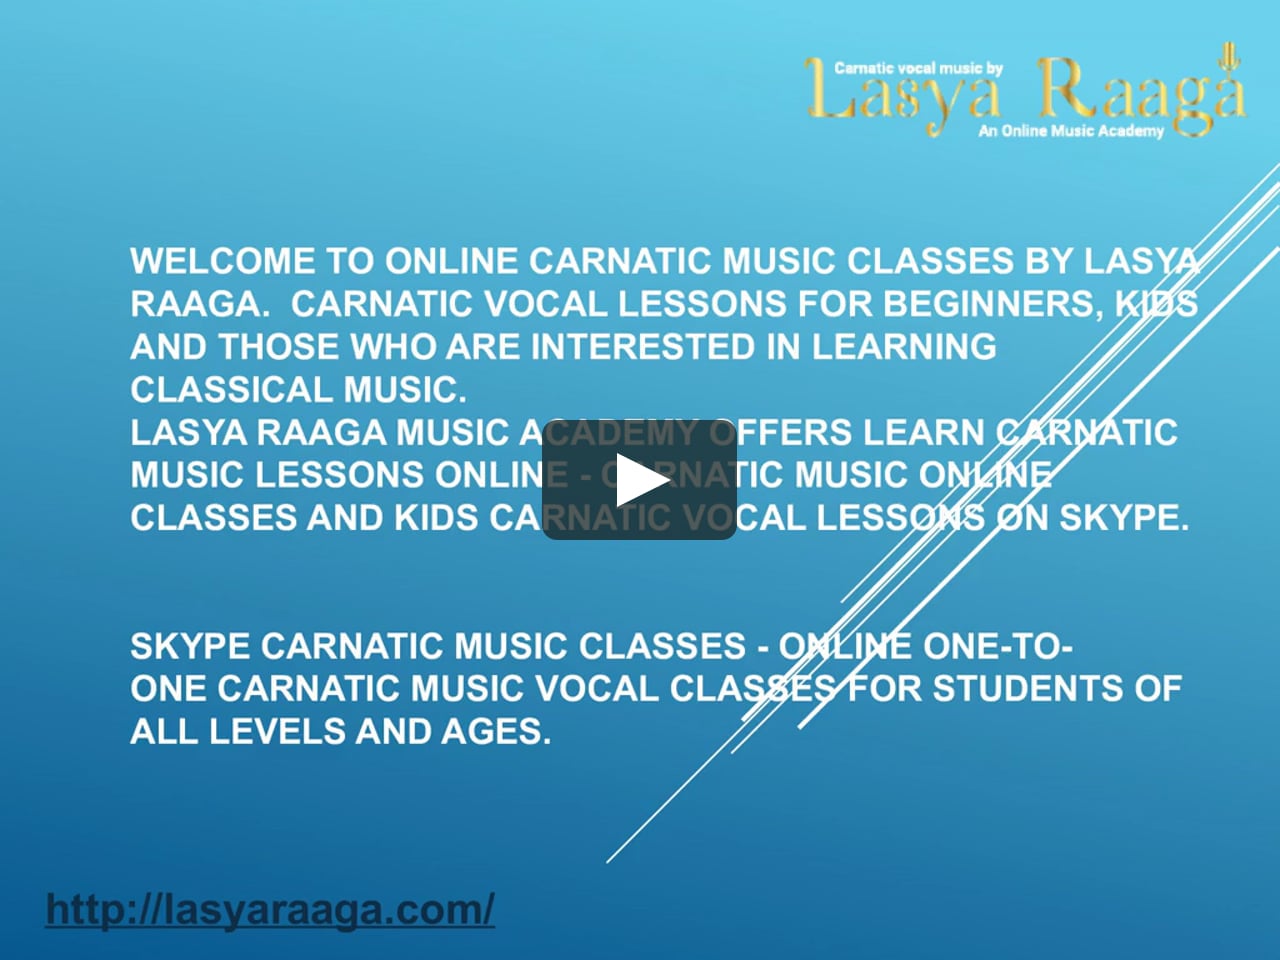 learning carnatic music online free